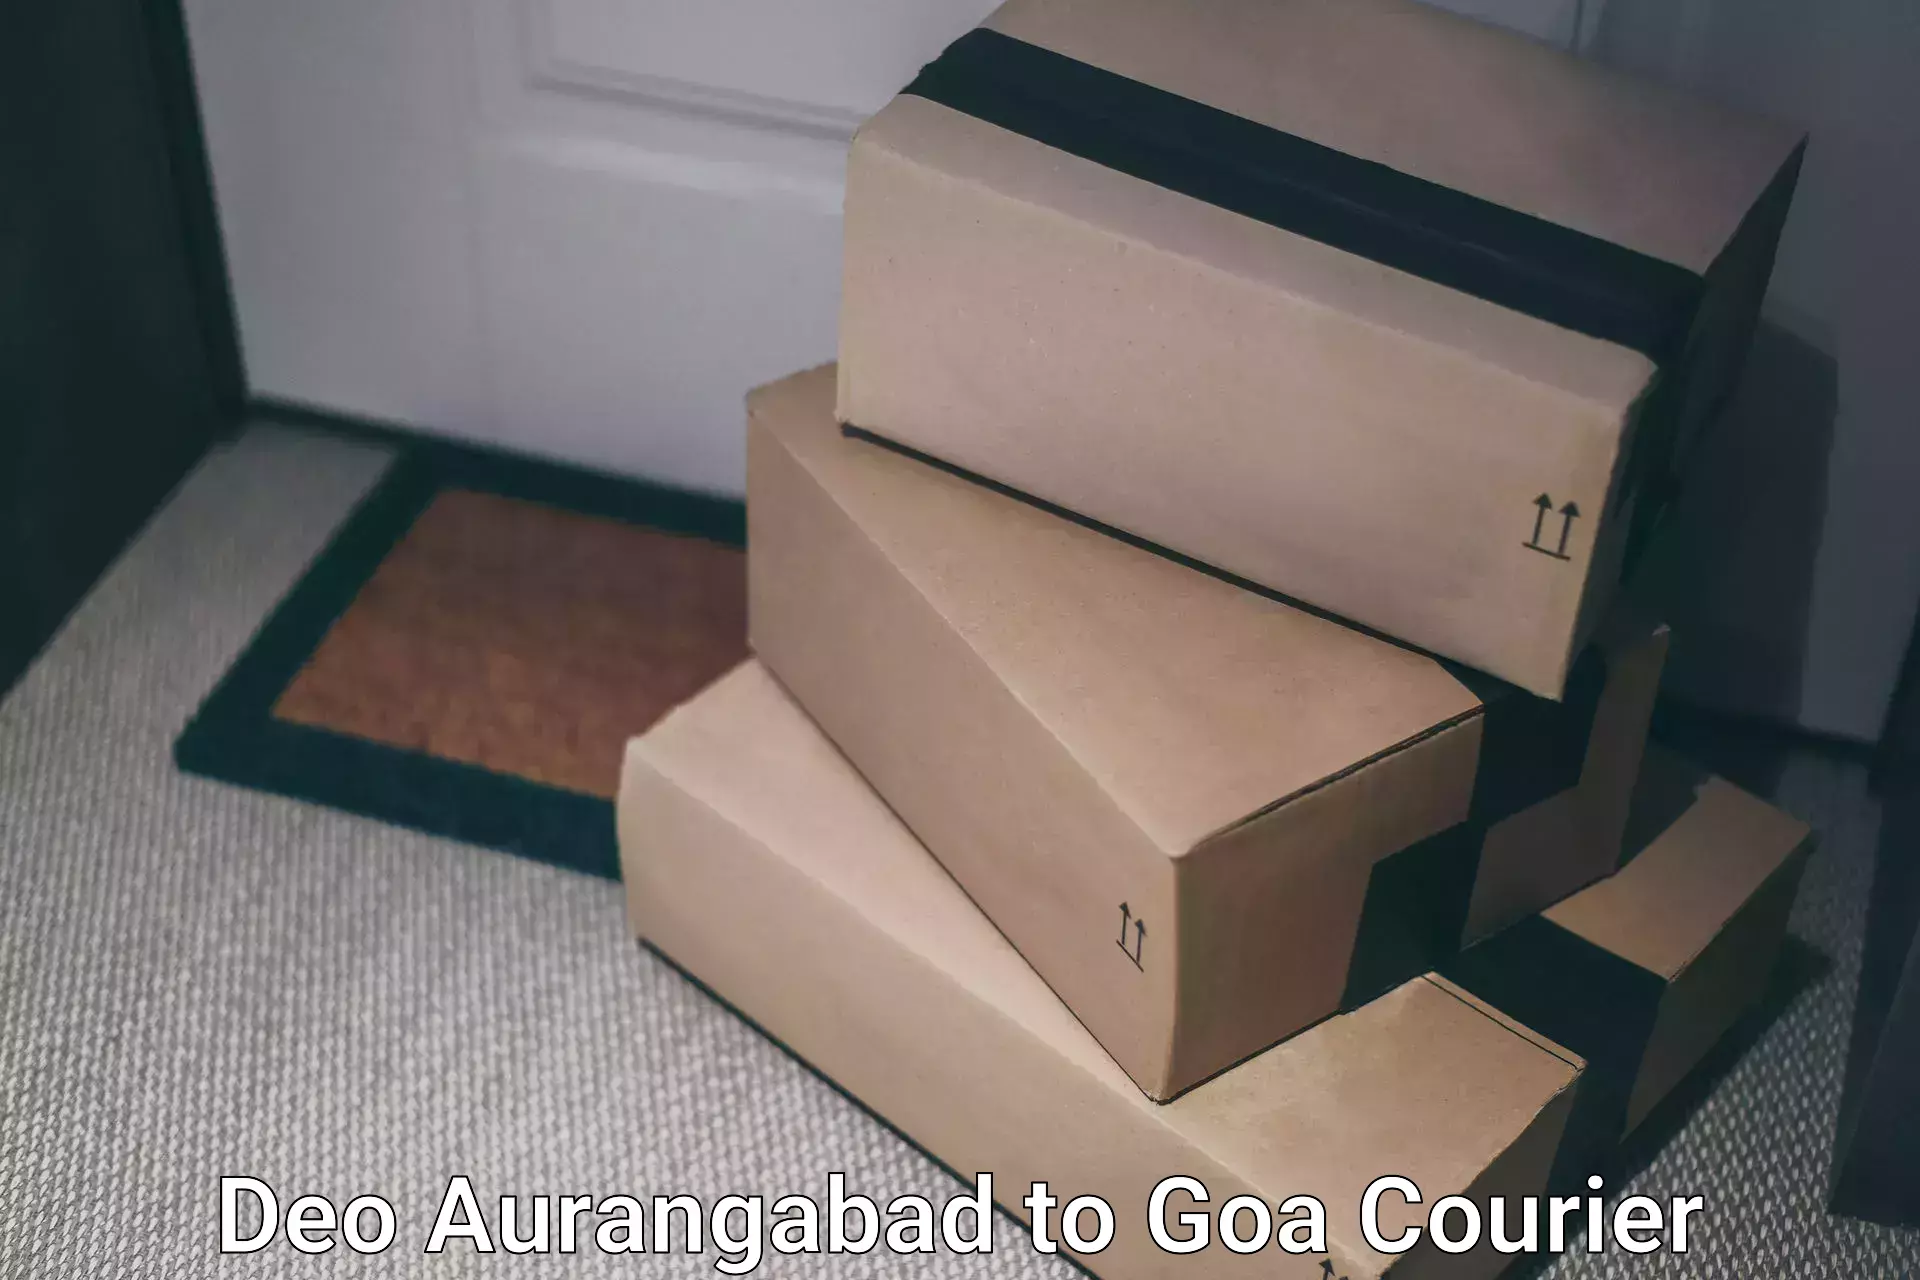 Medical delivery services Deo Aurangabad to Goa